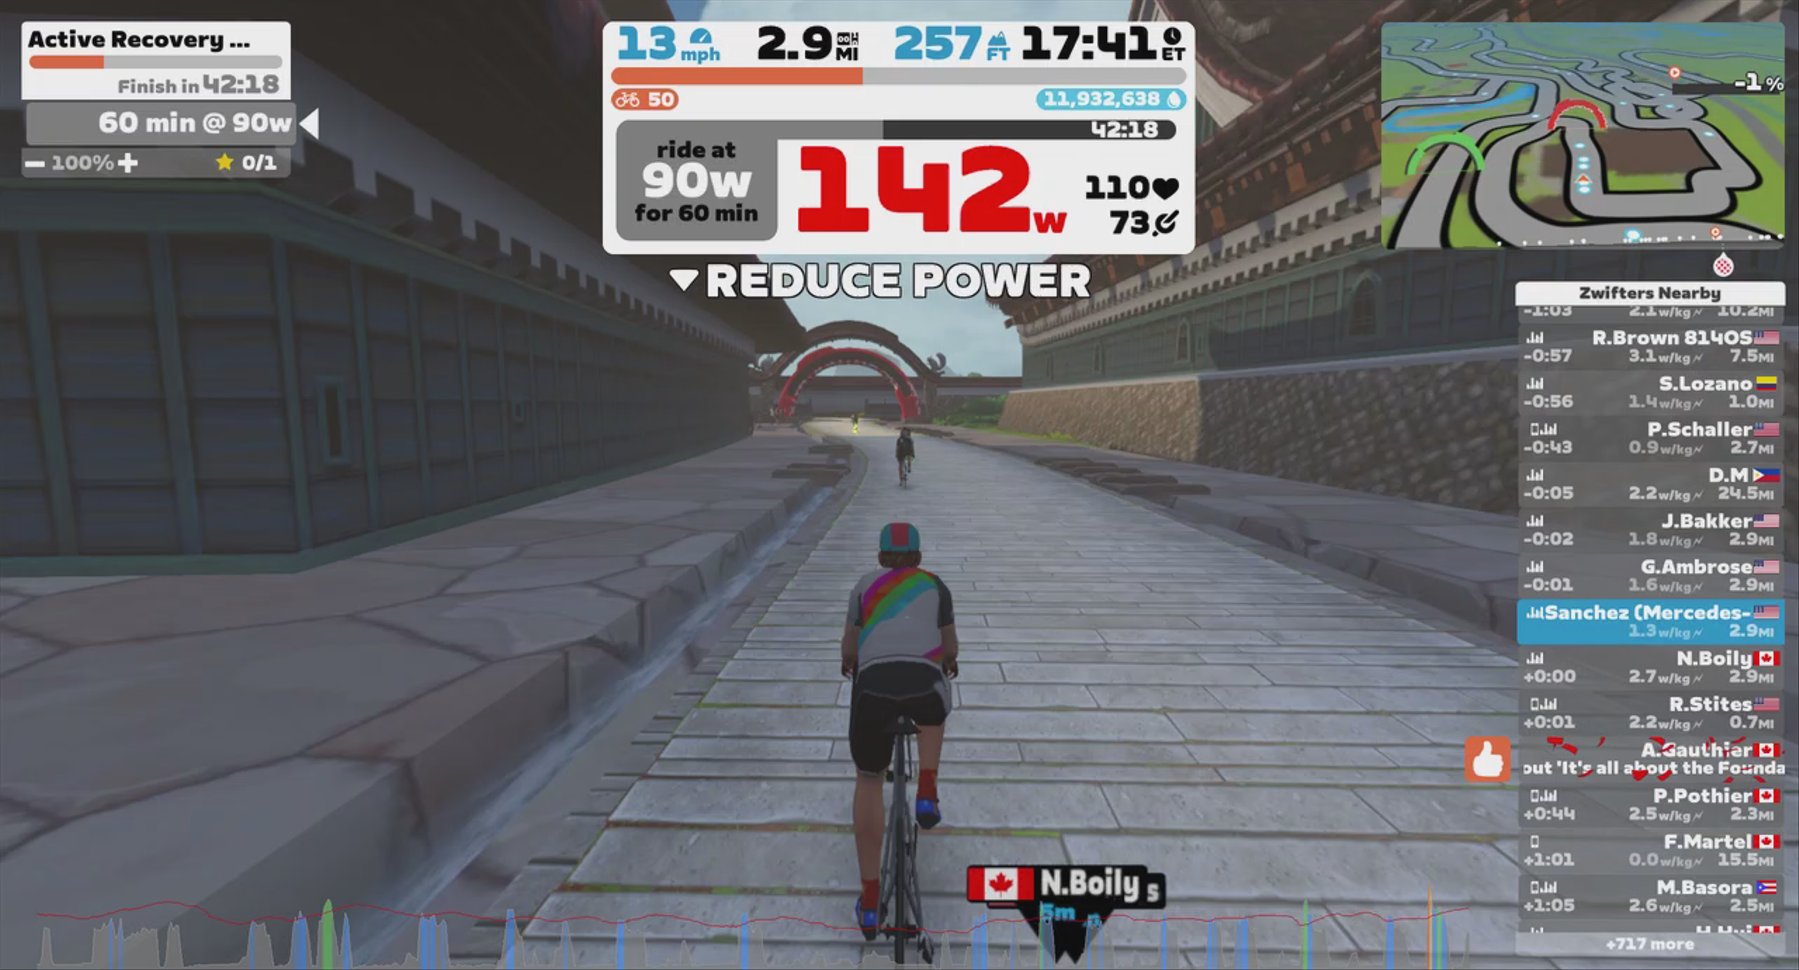 Zwift - Active Recovery 1:00 in Makuri Islands